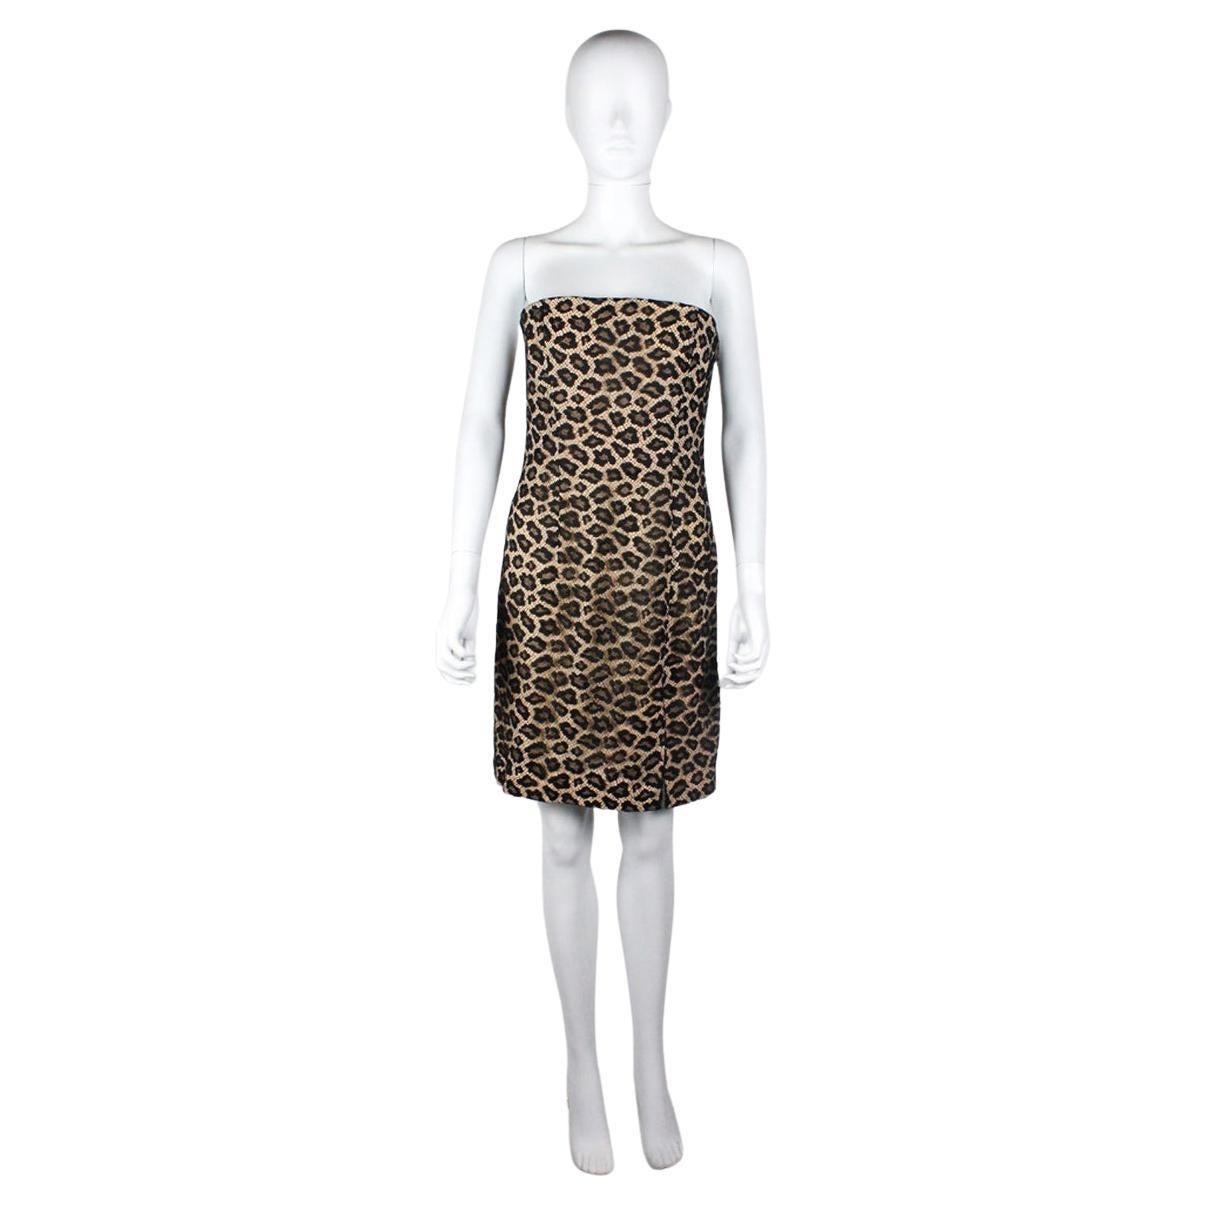 Givenchy Couture by Alexander McQueen Leopard Dress F/W 1997 For Sale